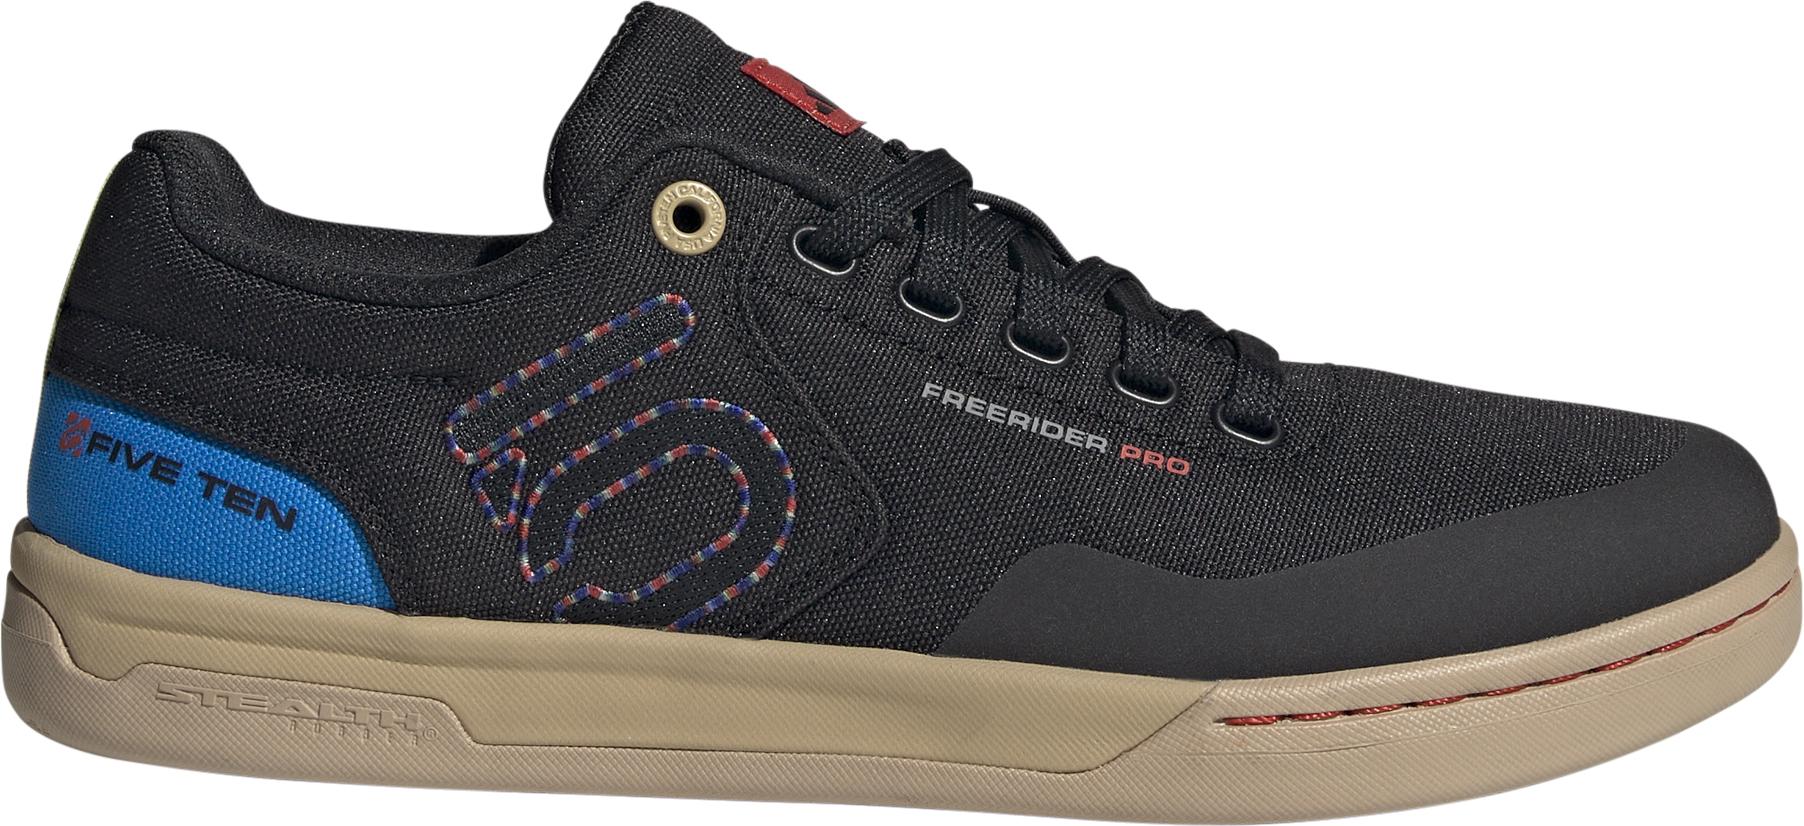 Five Ten Freerider Pro Canvas Cycle Shoes - Core Black/carbon/red